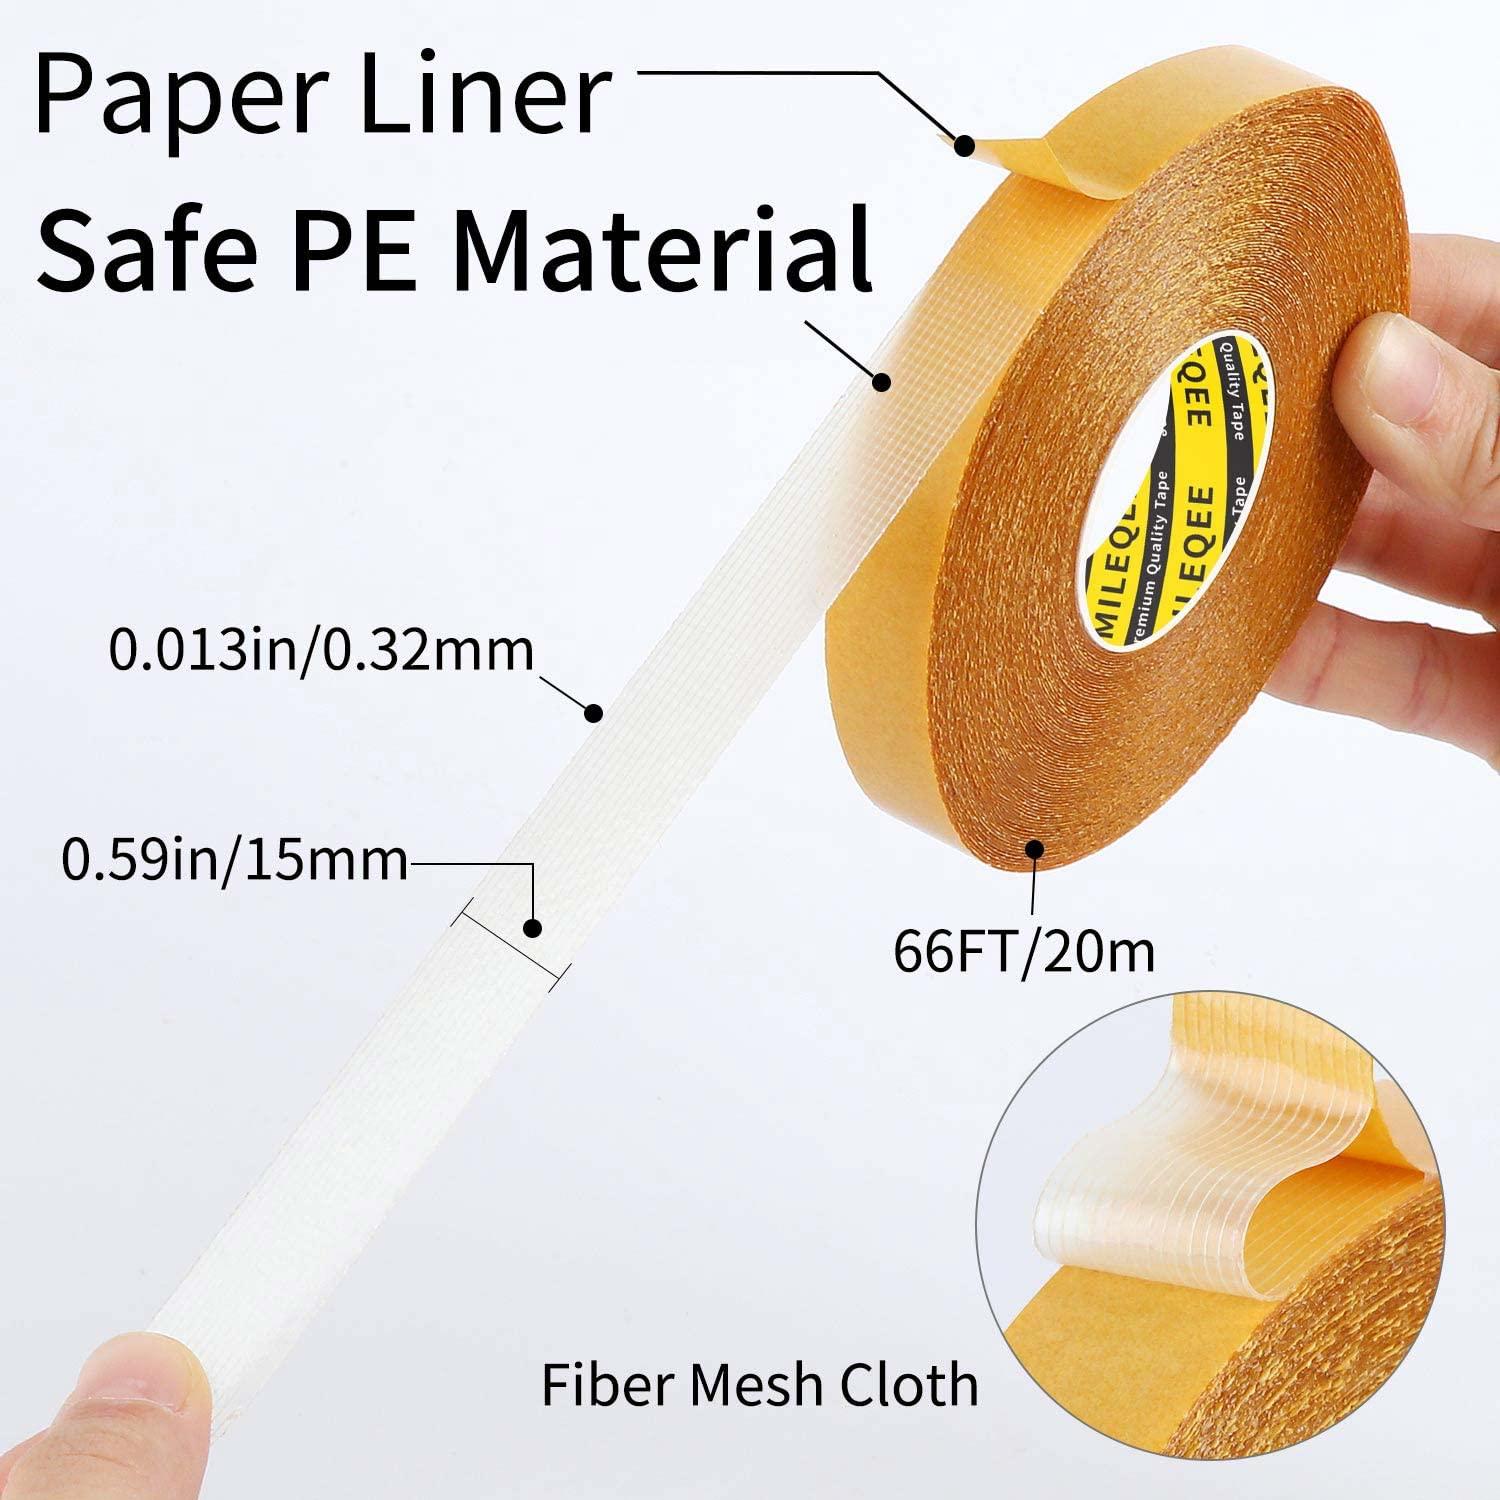  KAIHENG Double Sided Fabric Tape, Multifunctional Double Sided  Tape, Clear Tape for Clothes, Double Stick Carpet Tape, High Stickiness  Strong 2 Sided Tape, 1inchx33FT(10m) Clear Fashion Tape : Office Products